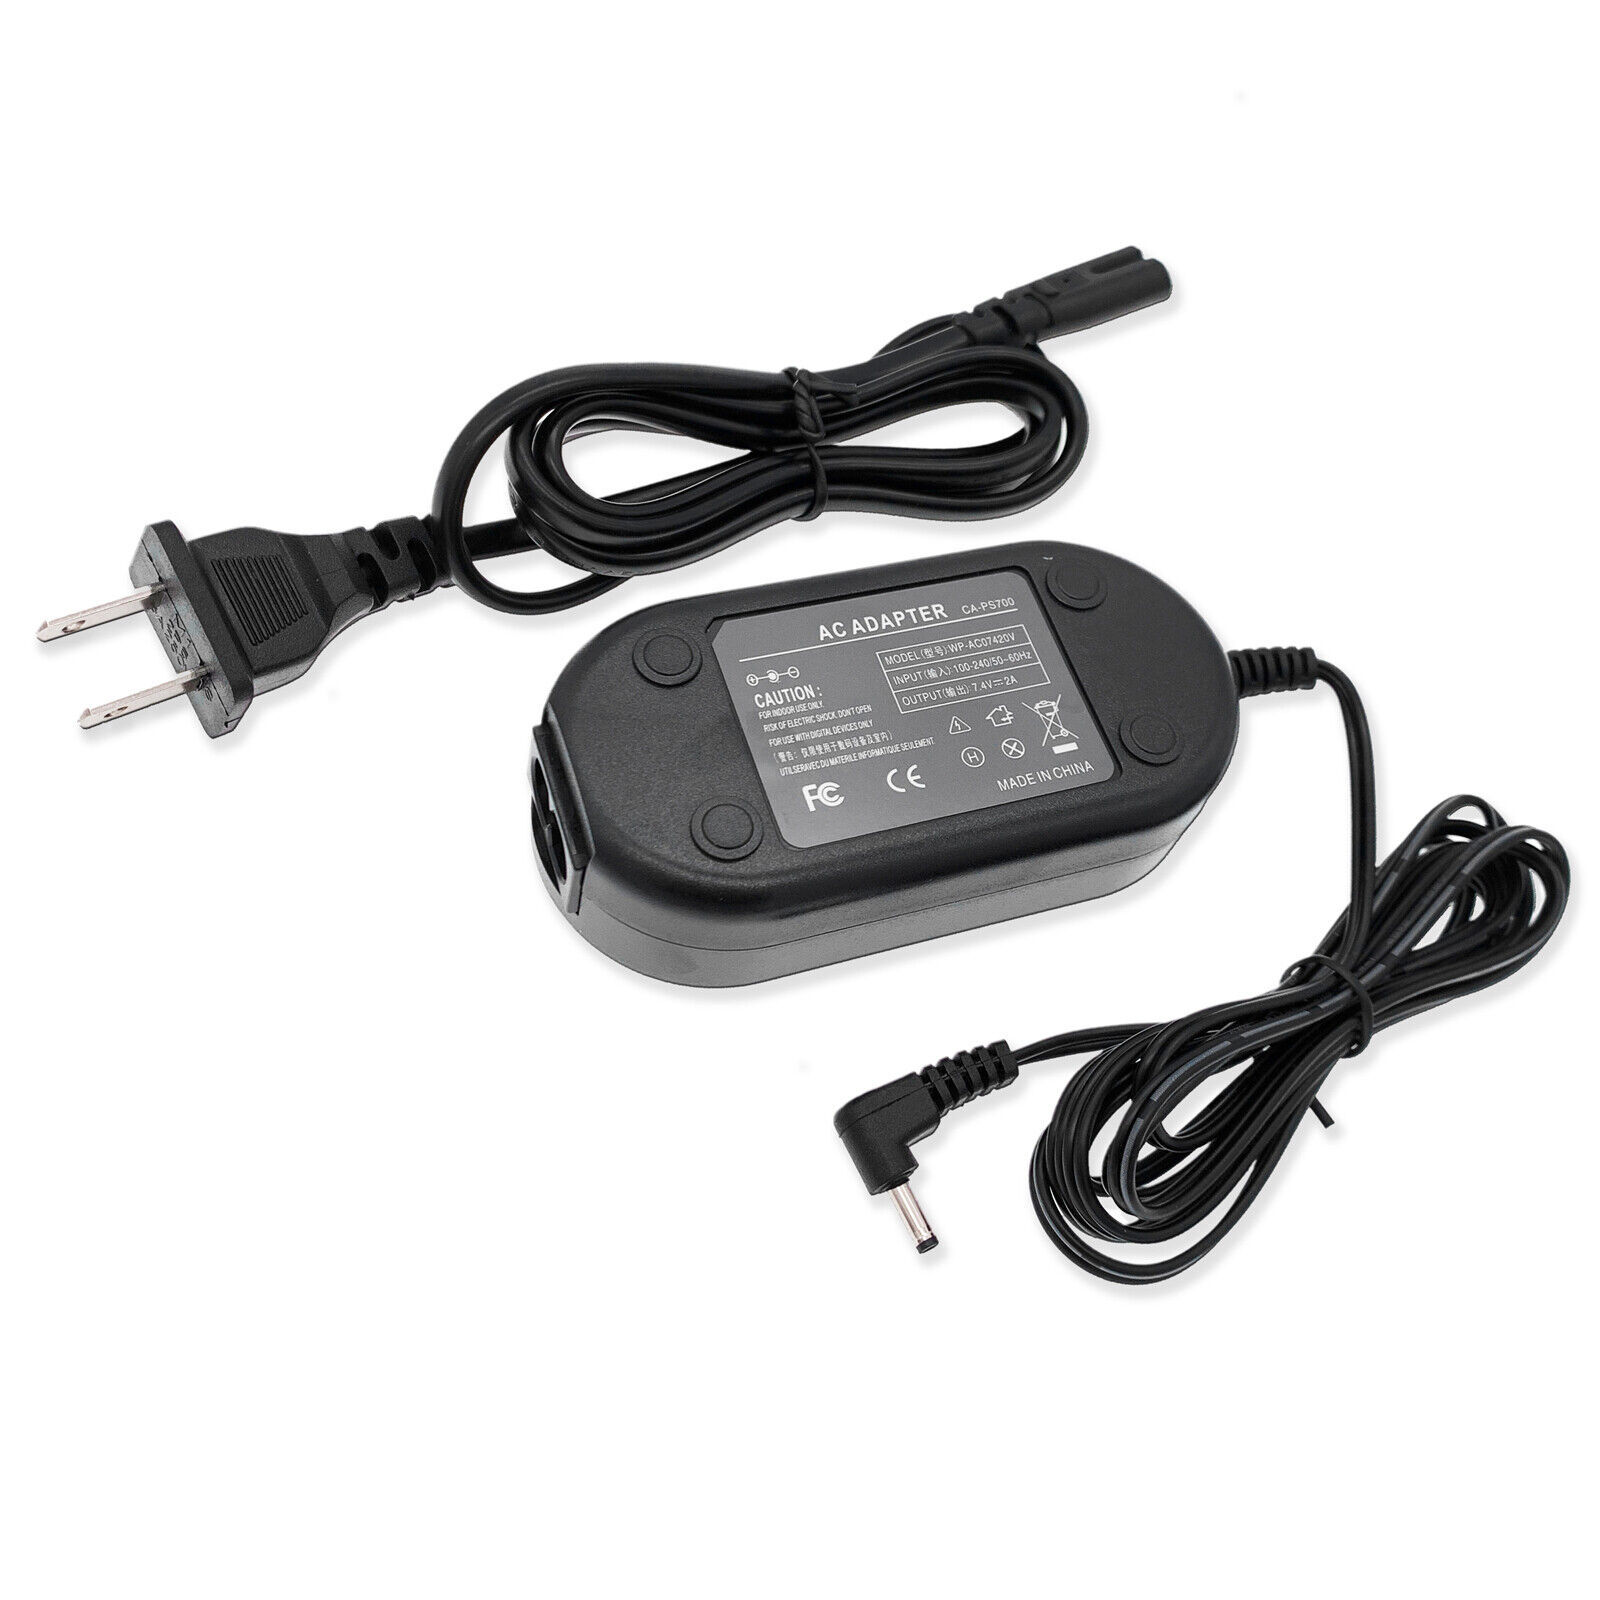 Ac Power Adapter For Canon Ca-Ps700 Powershot S40 S50 S60 S80 S1 S2 S3 S5 Is 5D - $23.99